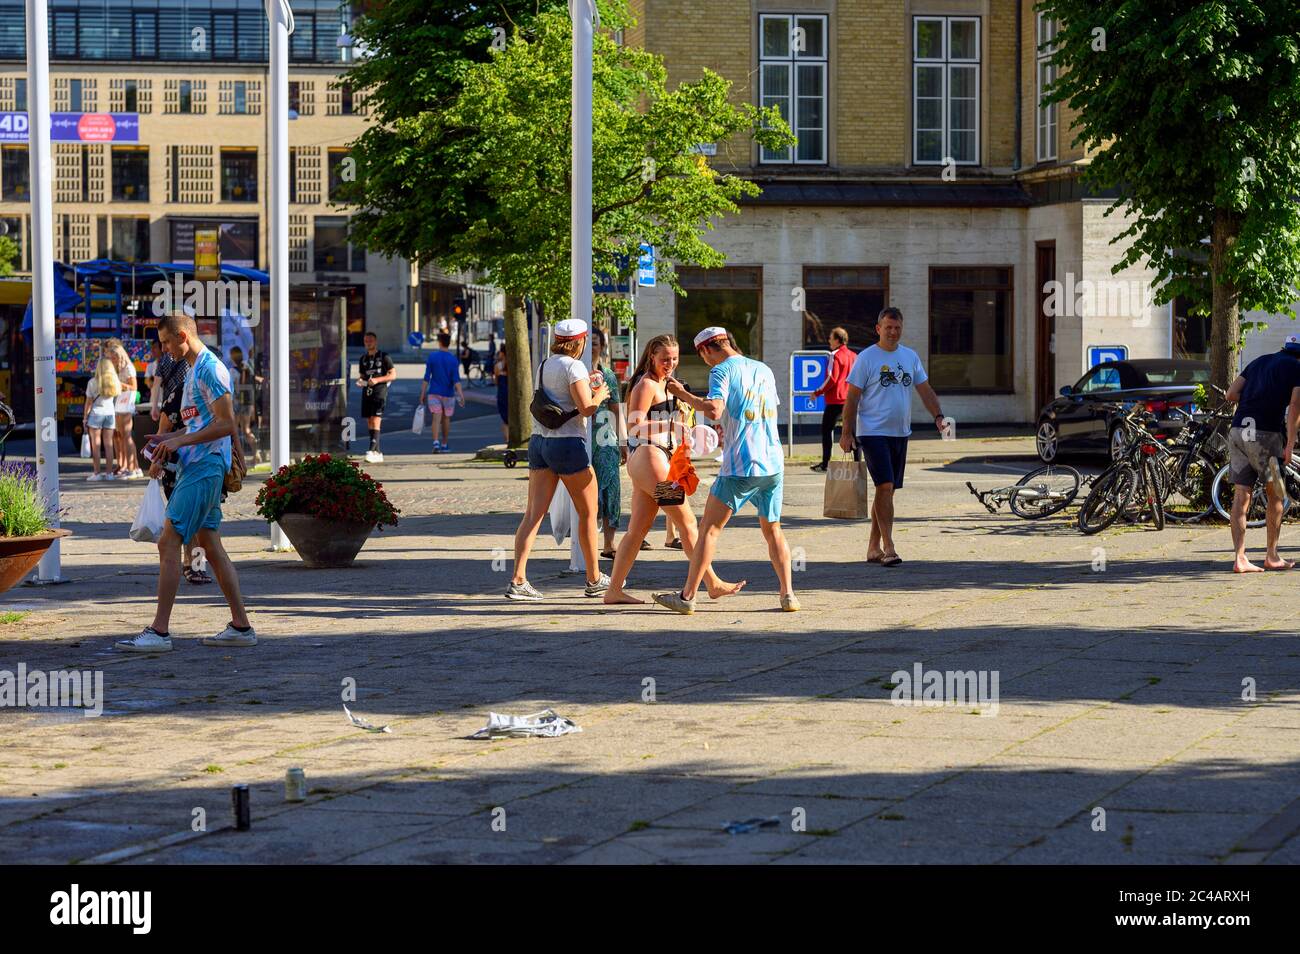 Some high school students gathered together to celebrate finishing high school in Arhus, Denmark on 25 June 2020 Stock Photo